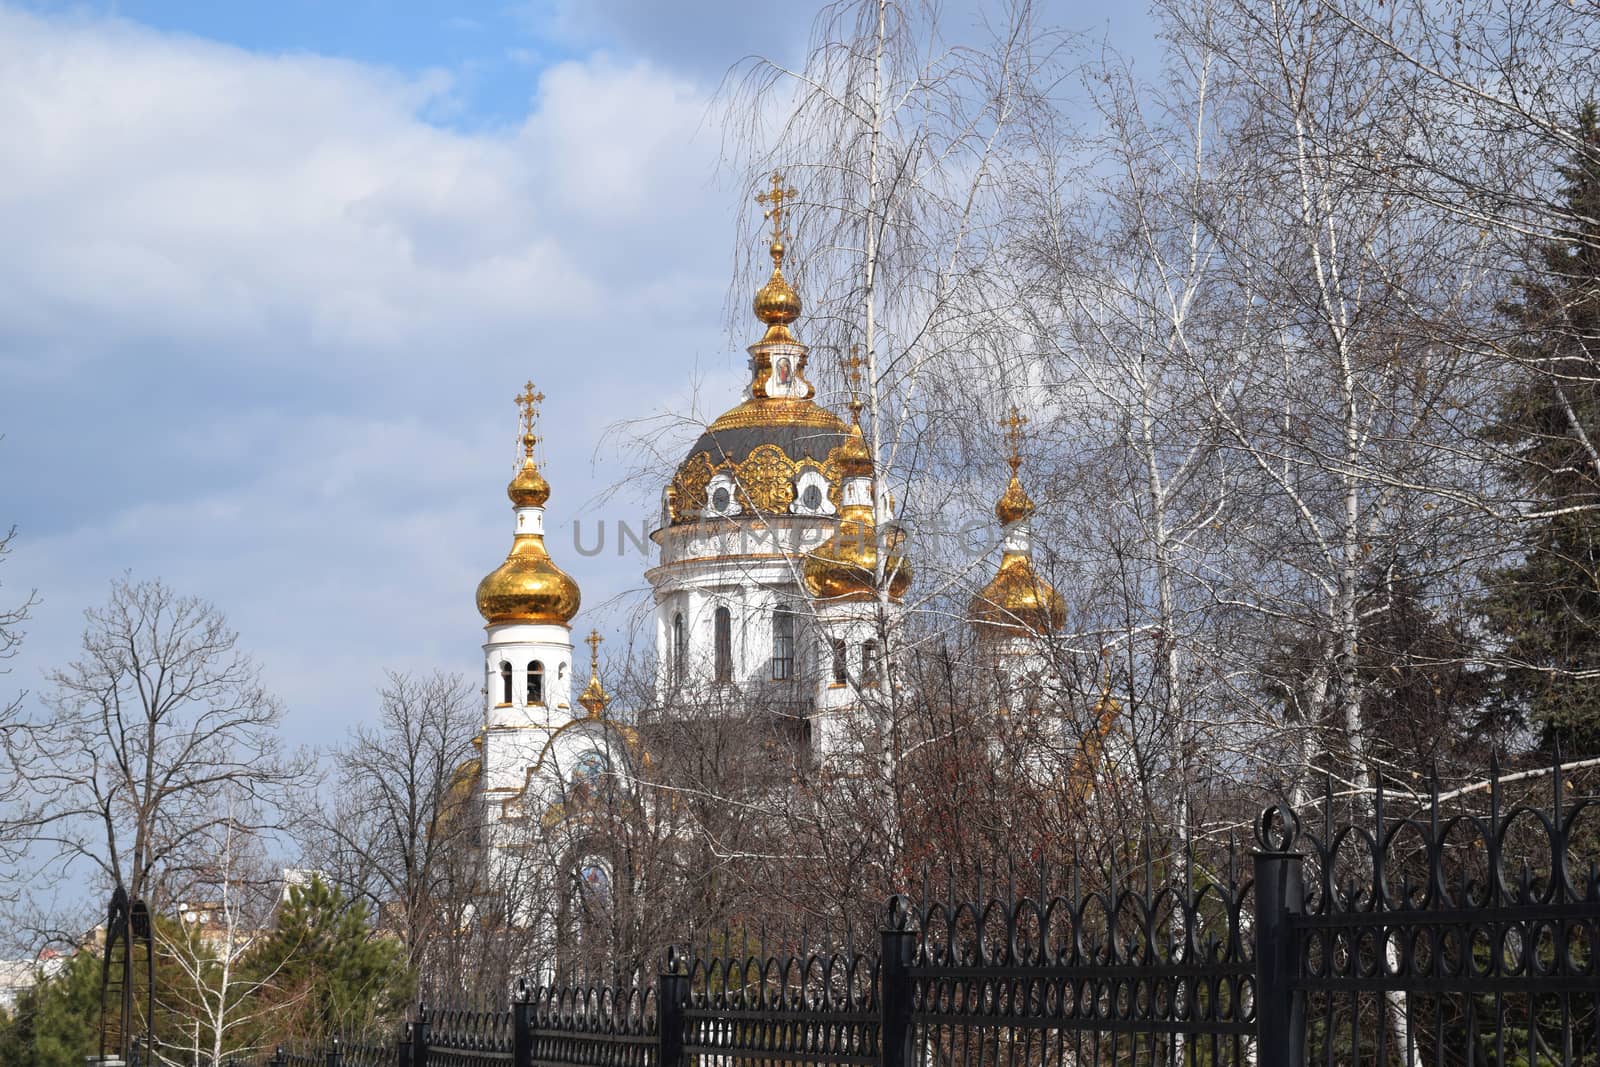 Golden domes of the Orthodox Church in the trees by IaroslavBrylov